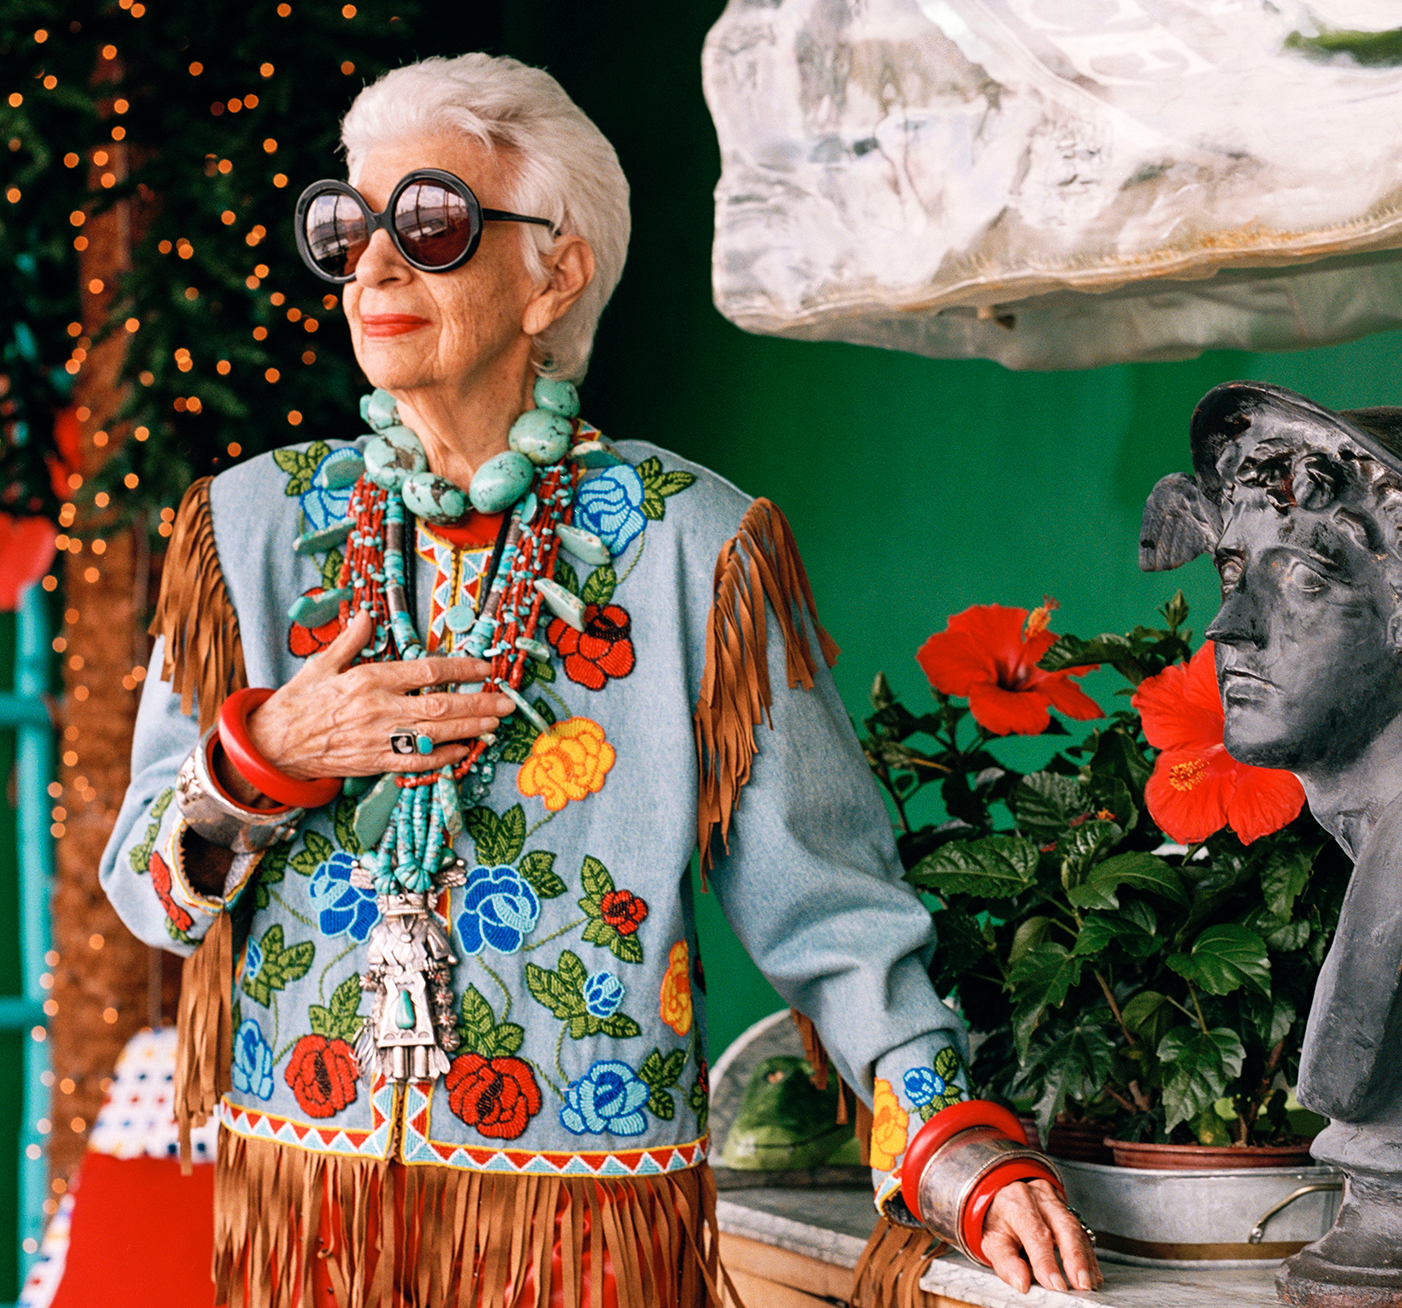 She's So Violet: IRIS APFEL  |  The 93-year-old style icon on eccentric fashion, lasting love and all those bangles  |  #VioletGrey, The Industry's Beauty Edit